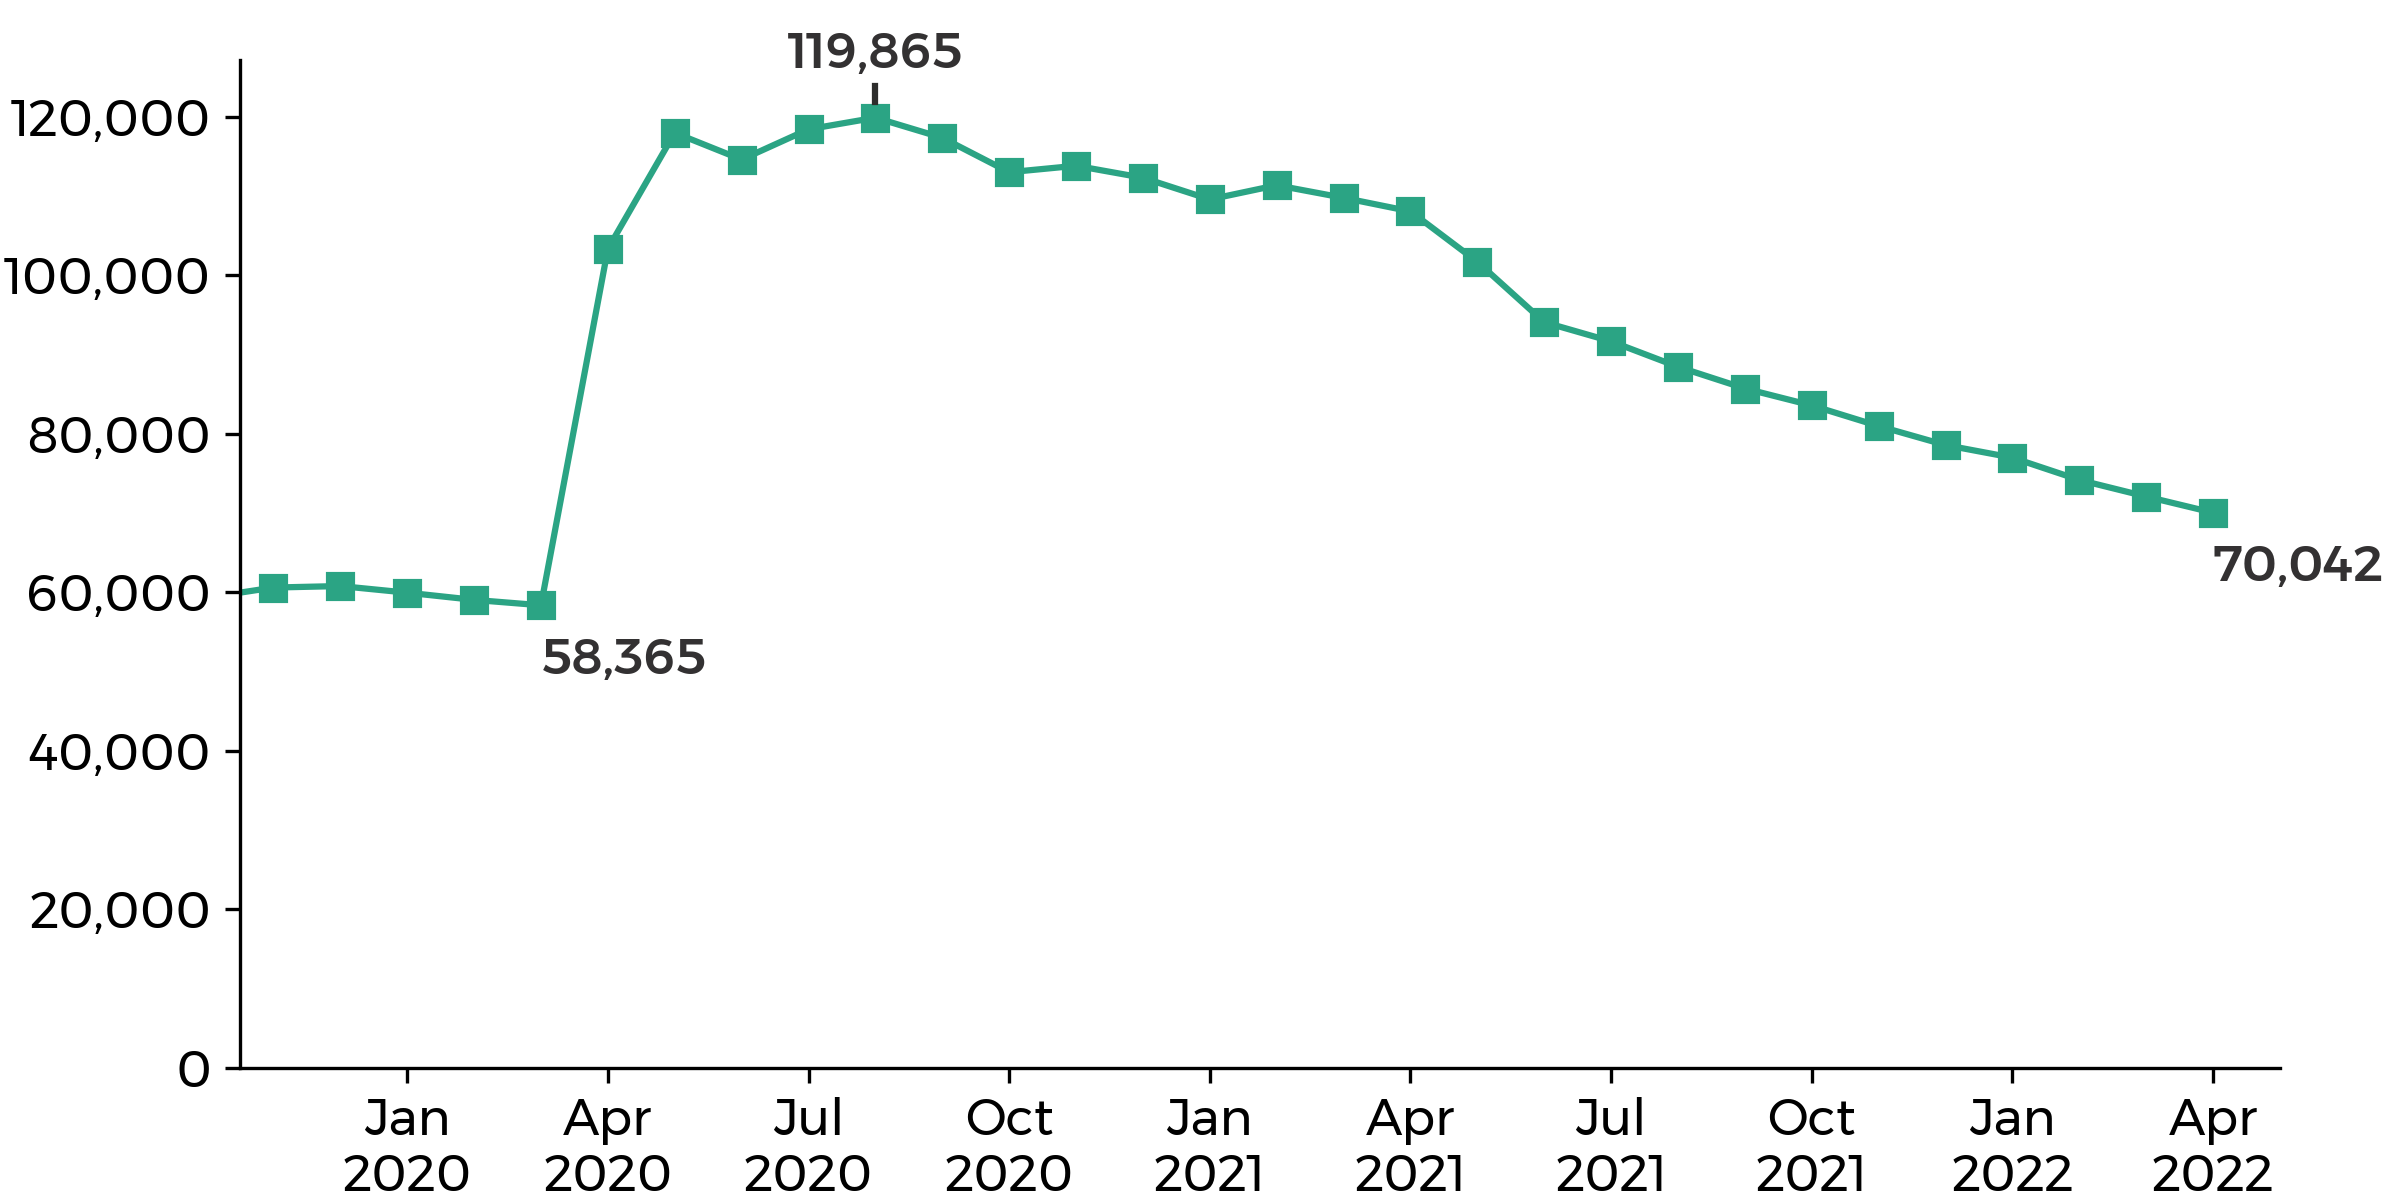 graph showing the Wales claimant count went up from 58,365 in March 2020 to 119,865 in August 2020, then decreasing to 70,042 in April 2022.